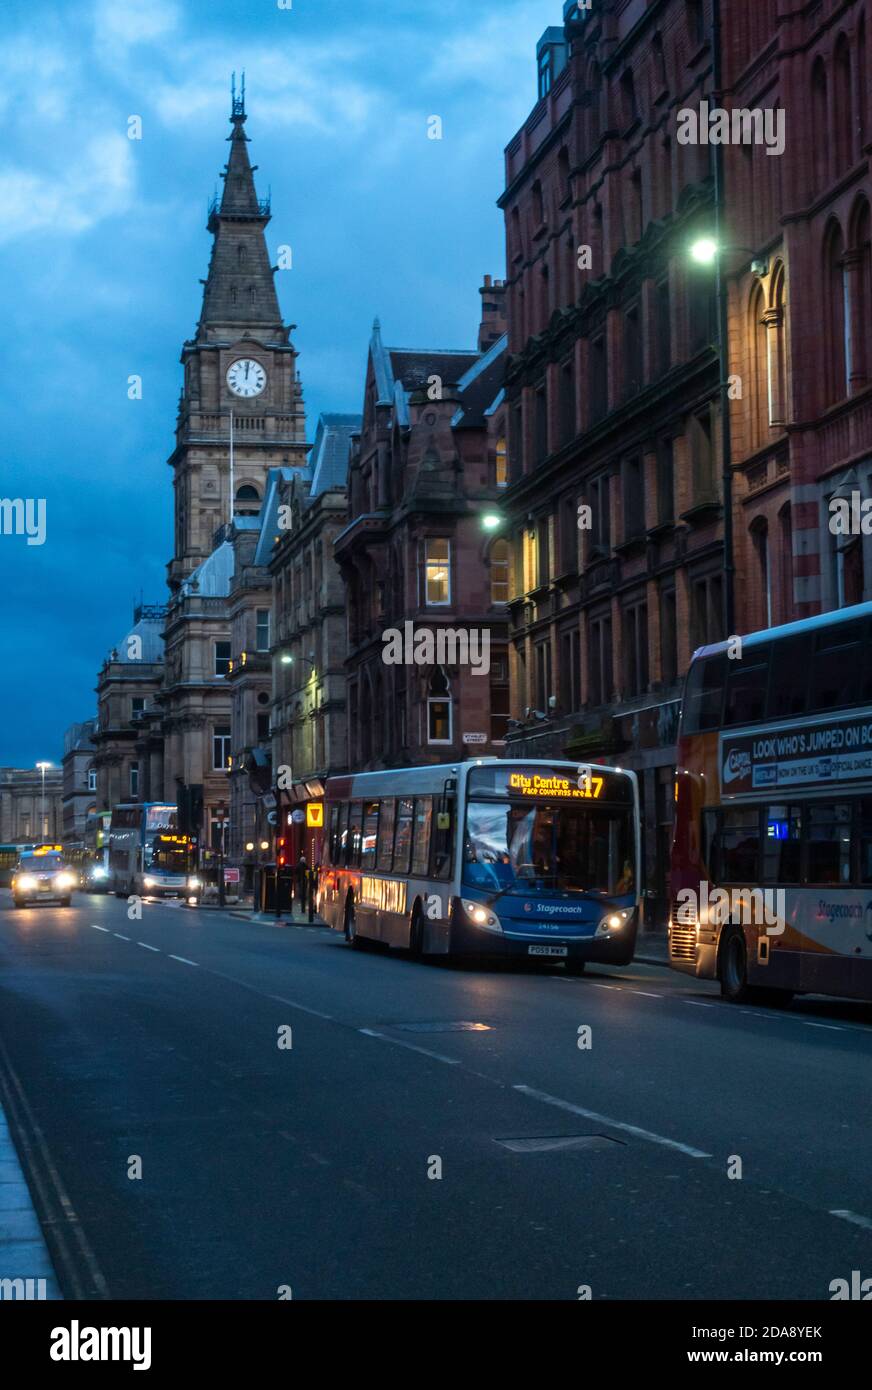 Bus stop at night on Dale Street, Liverpool Stock Photo